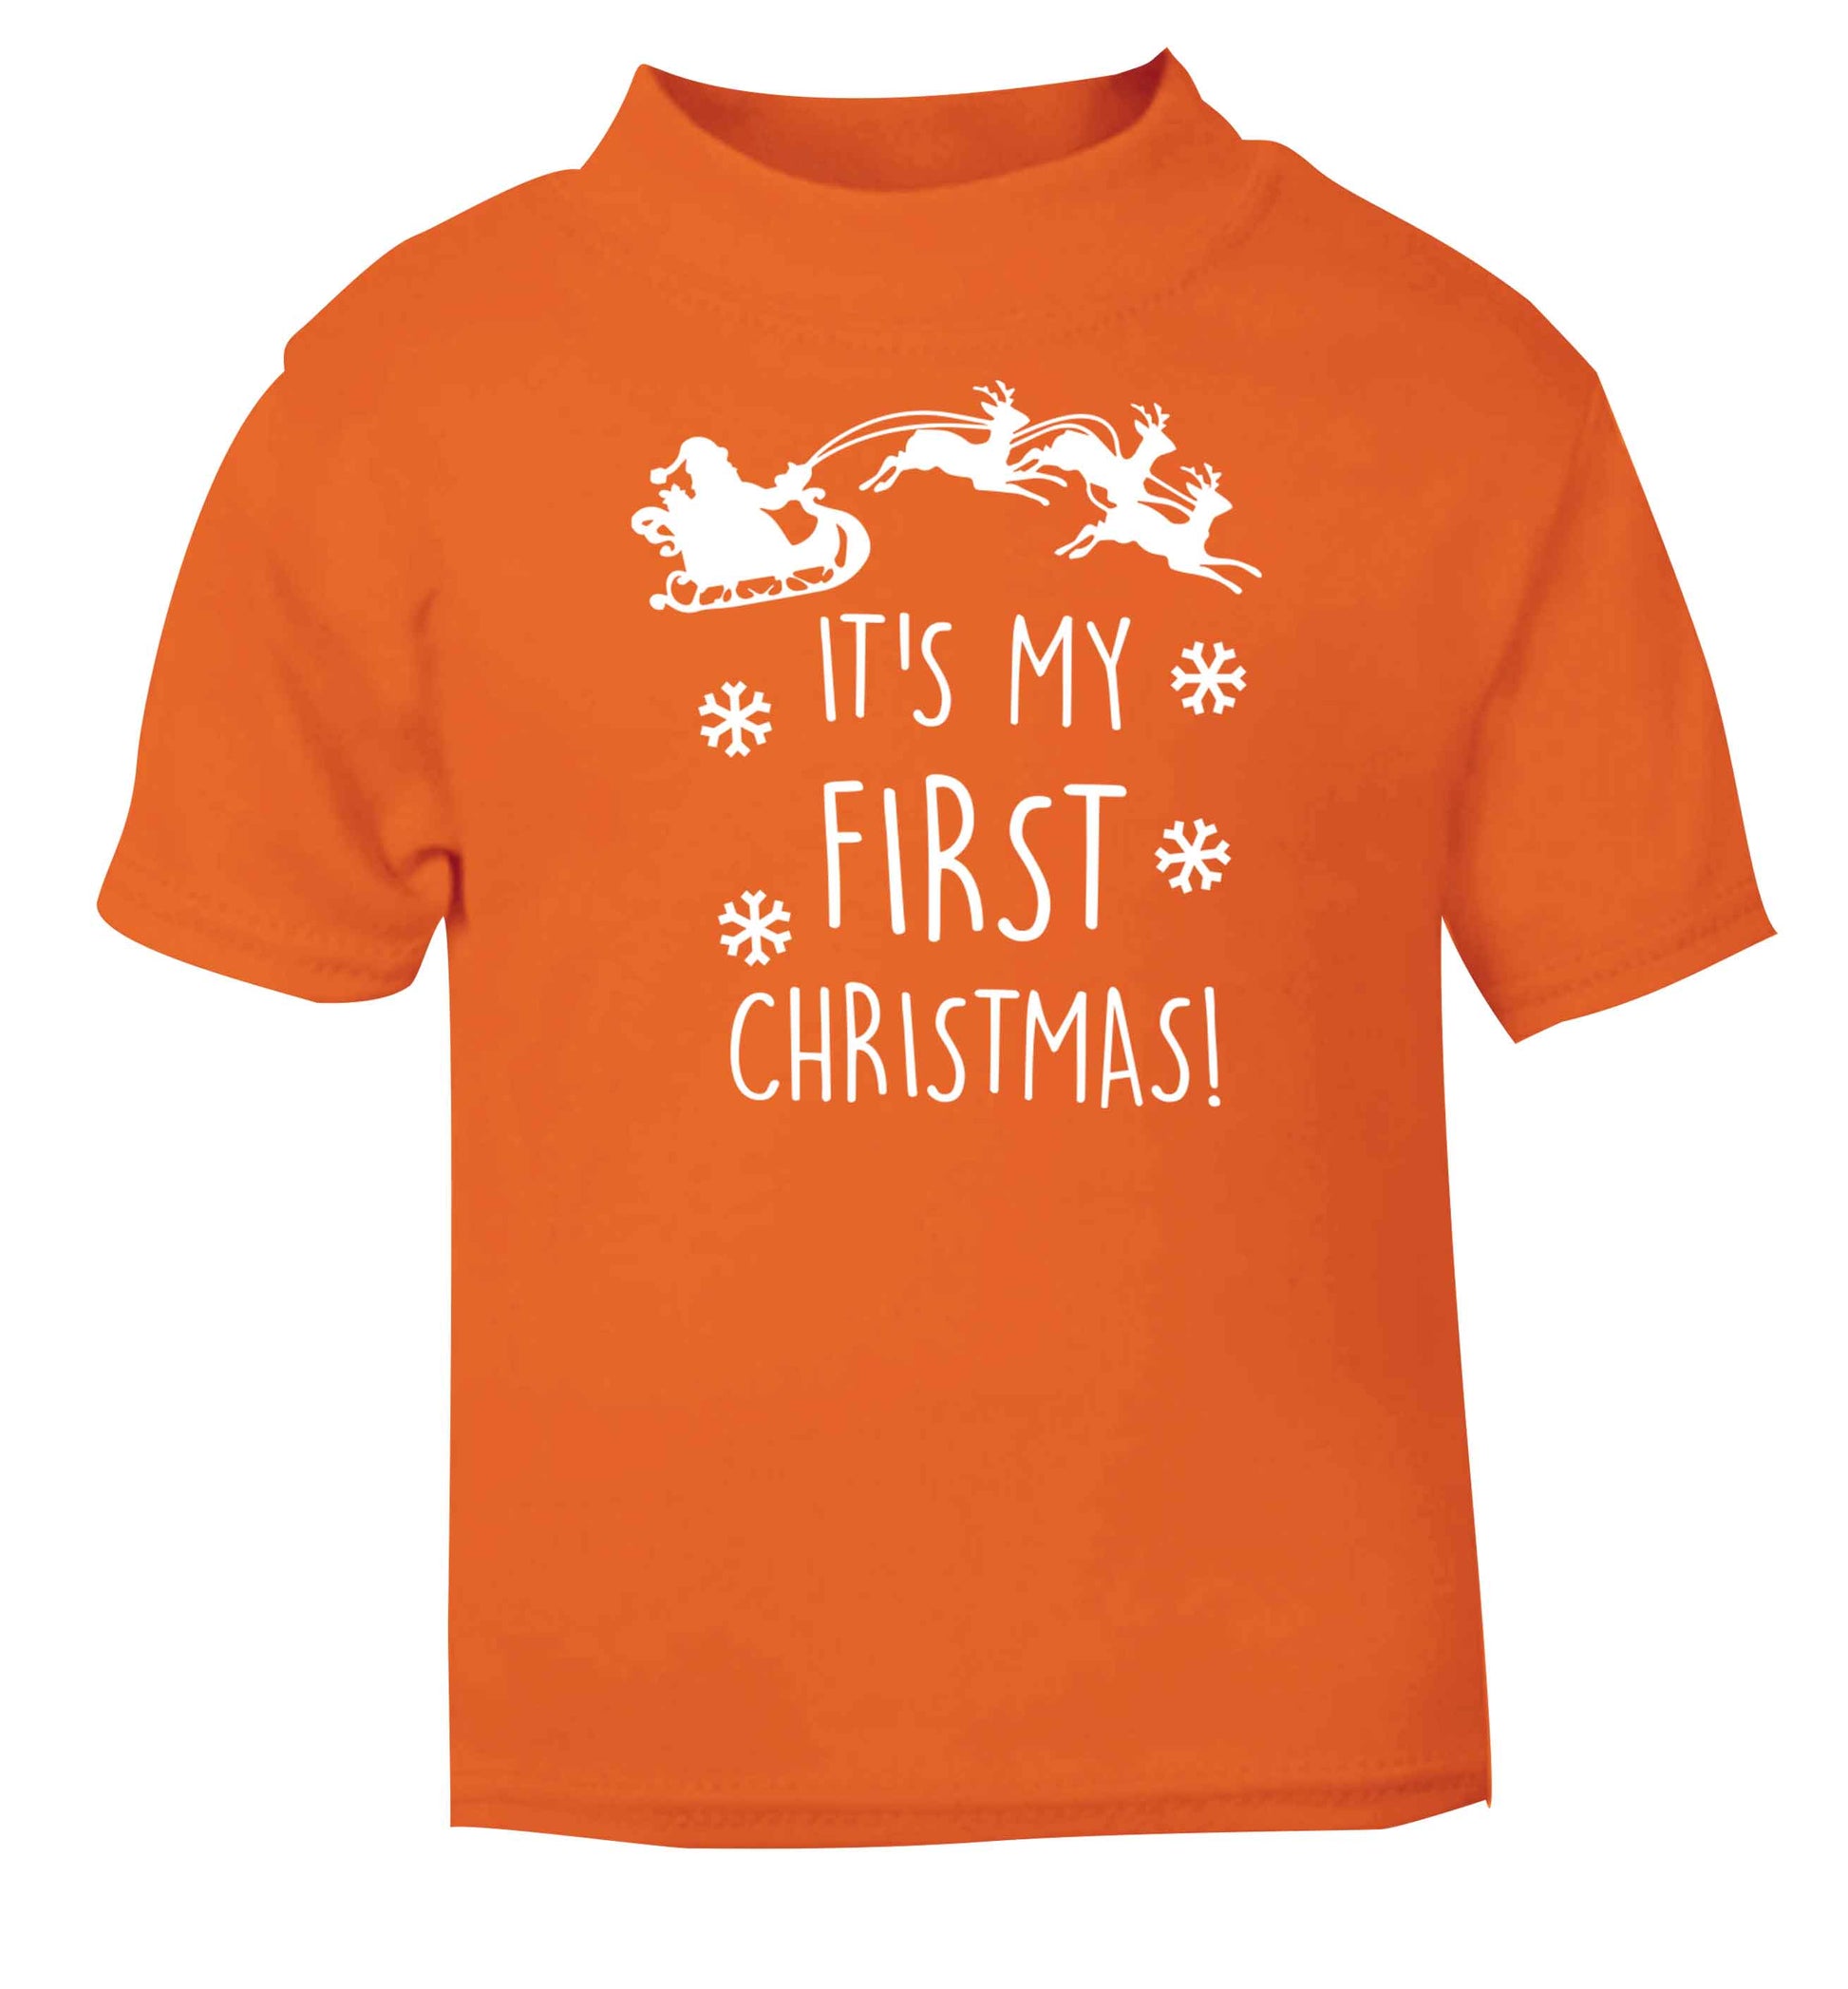 It's my first Christmas - Santa sleigh text orange baby toddler Tshirt 2 Years